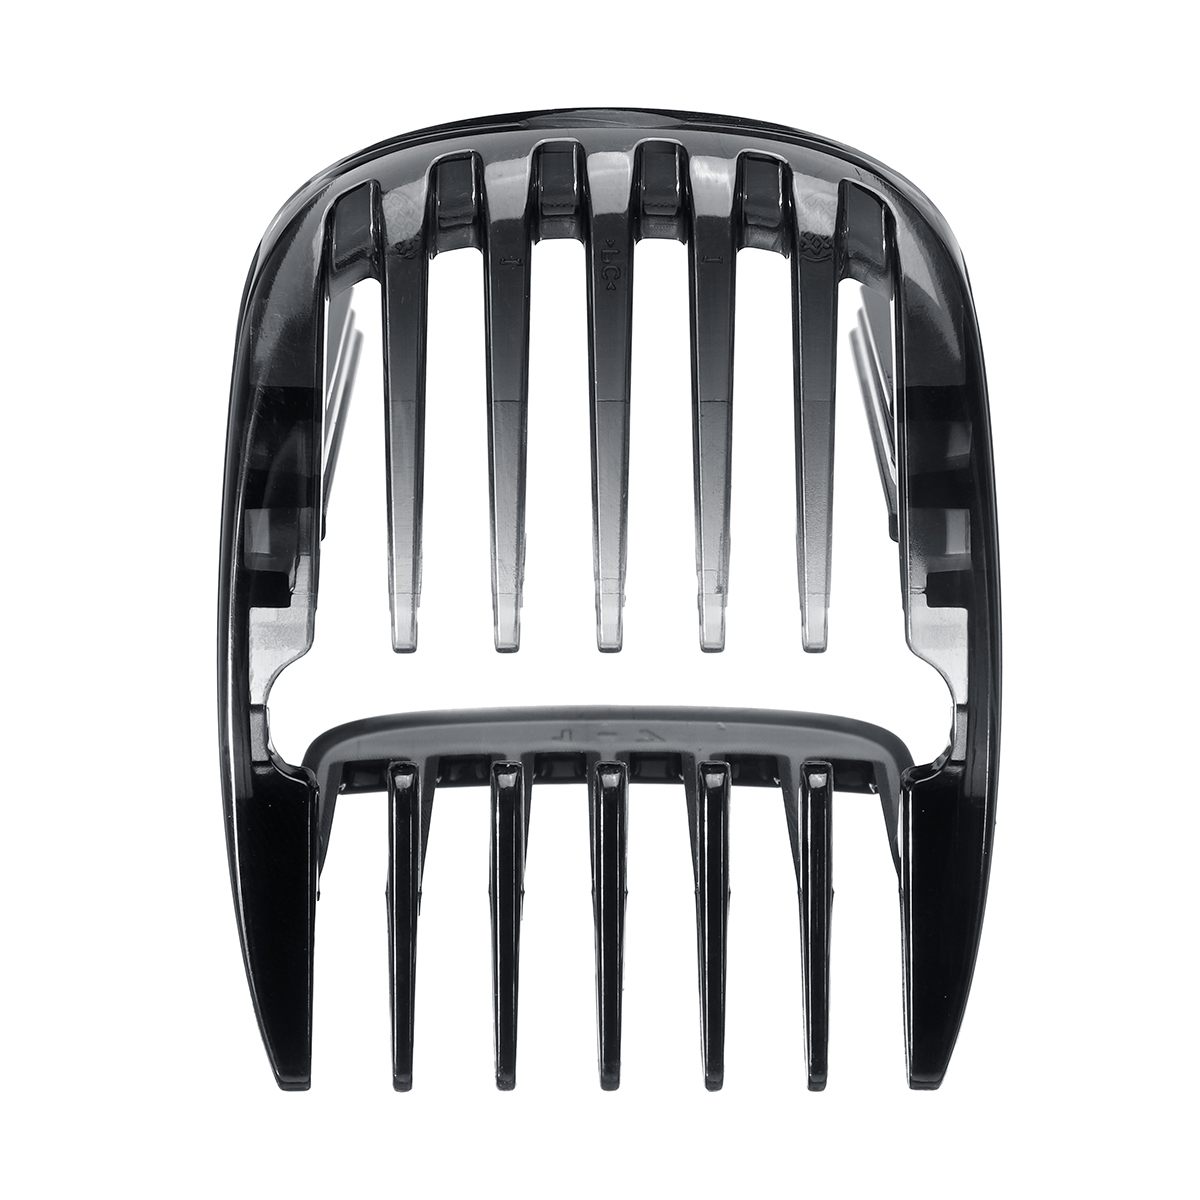 1pcs Hair Clipper Comb for Philips HC9450 HC9490 HC9452 HC7460 HC7462 Hair Trimmer 1-7mm Replacement Comb